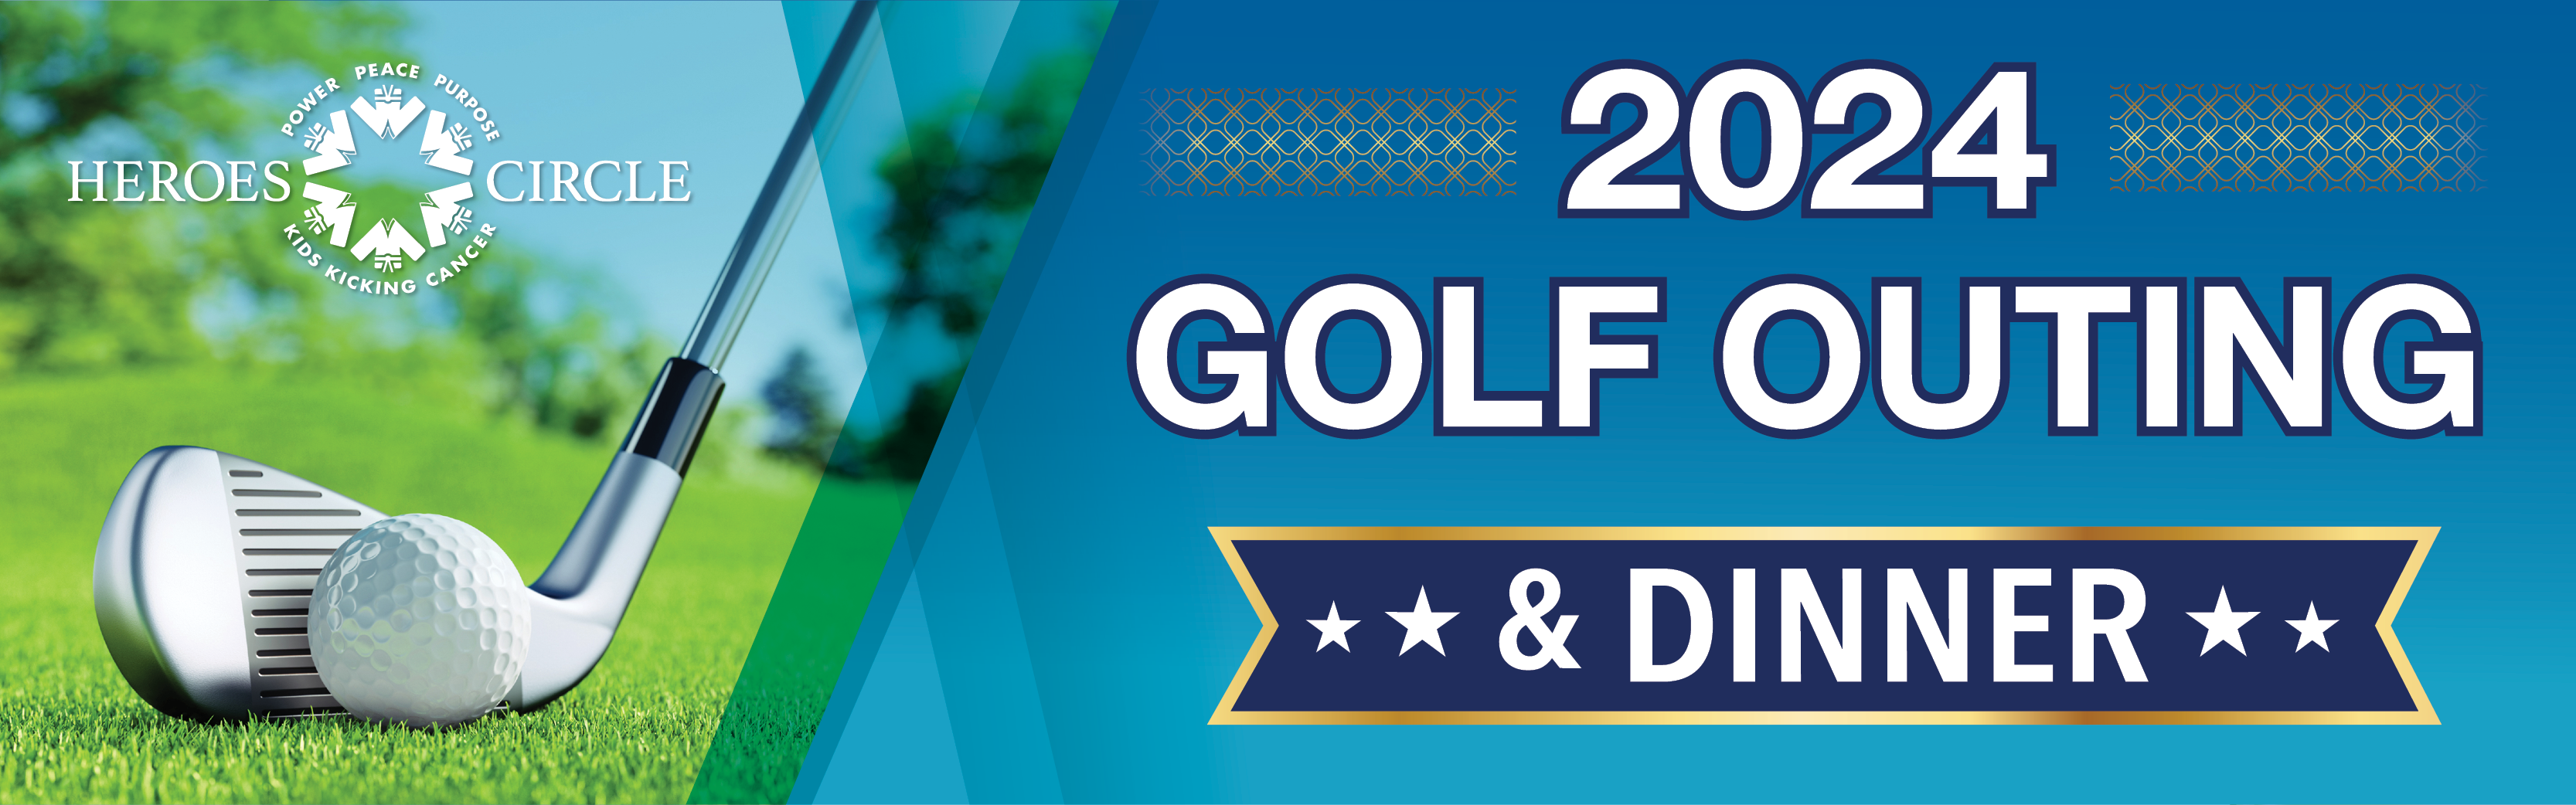 2024 Golf Outing Header Graphic